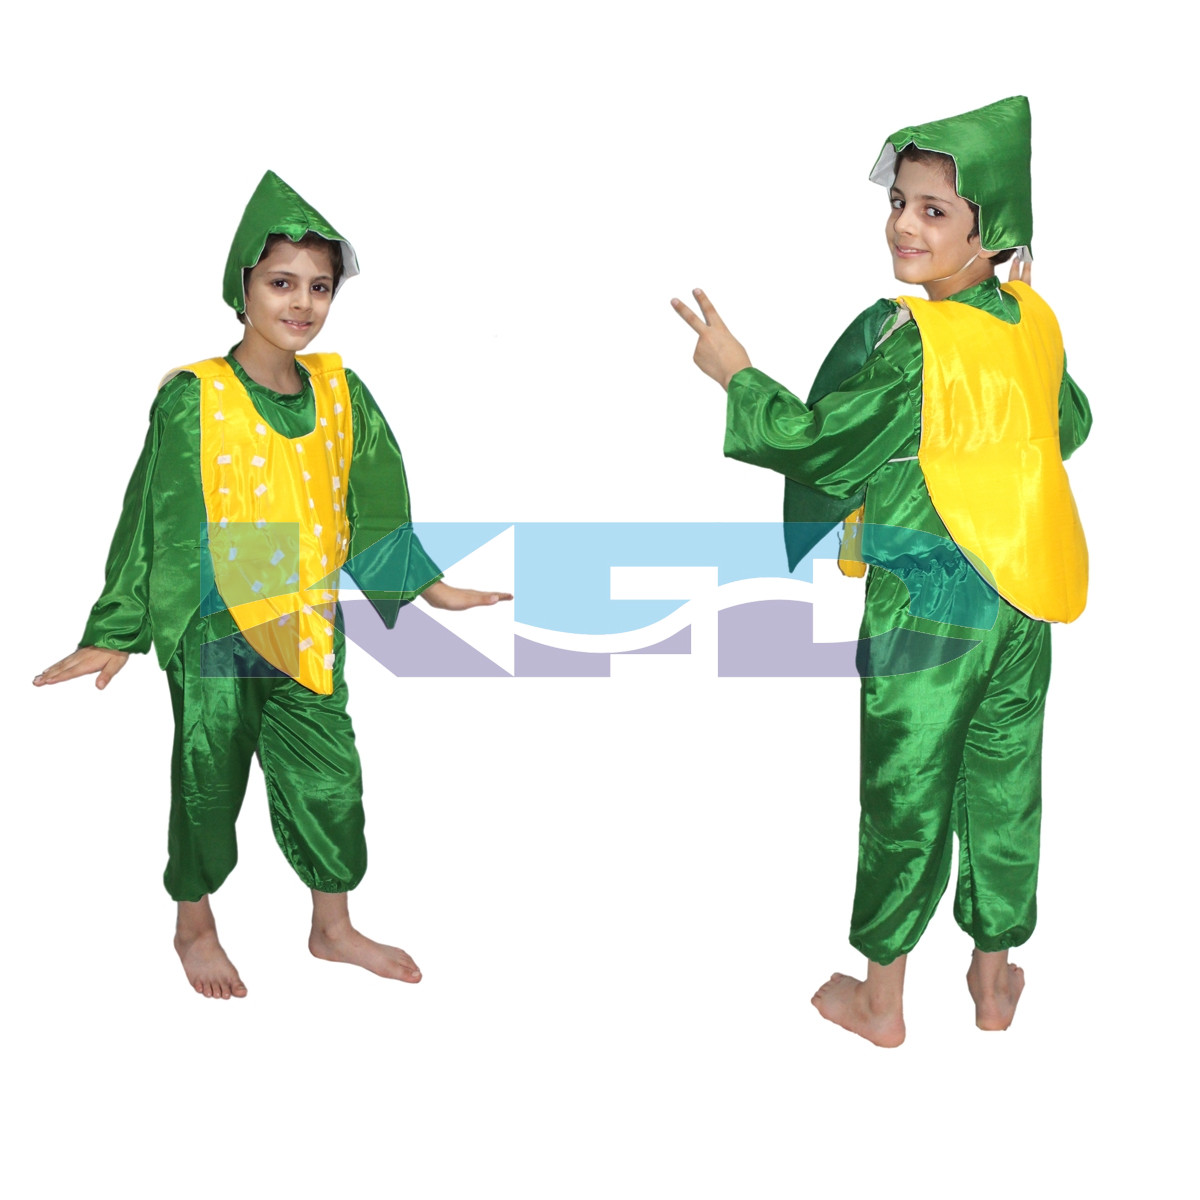 Corn fancy dress for kids,Vegetables Costume for School Annual function/Theme Party/Competition/Stage Shows Dress